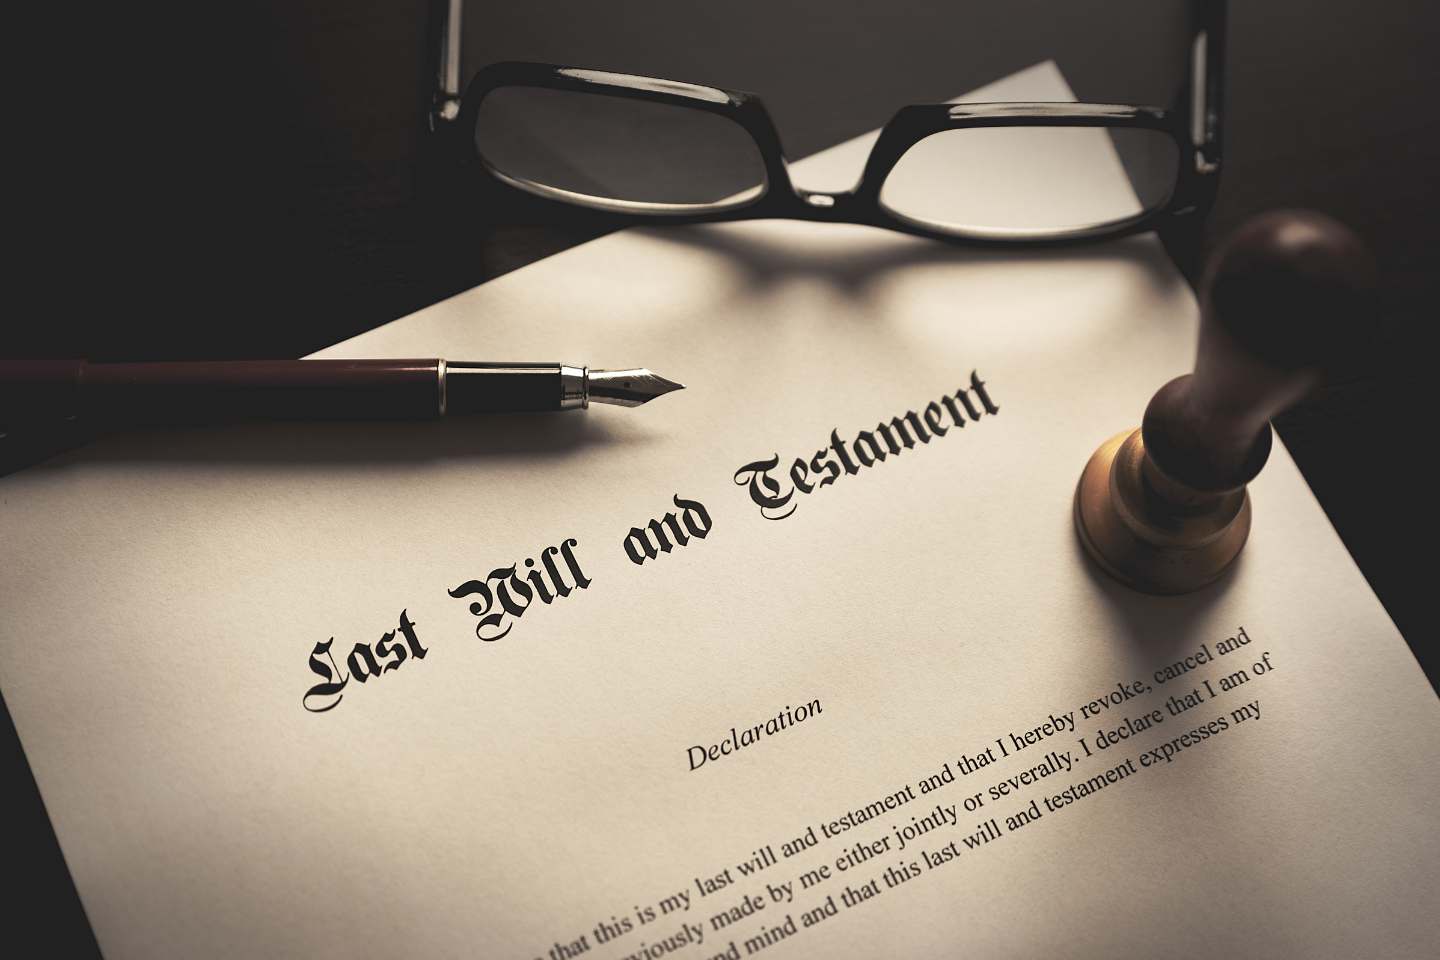 Last will and testament document. Avoid probate in Missouri by going beyond basic estate planning. Learn why a will alone is not enough and discover essential strategies for a more robust estate plan.